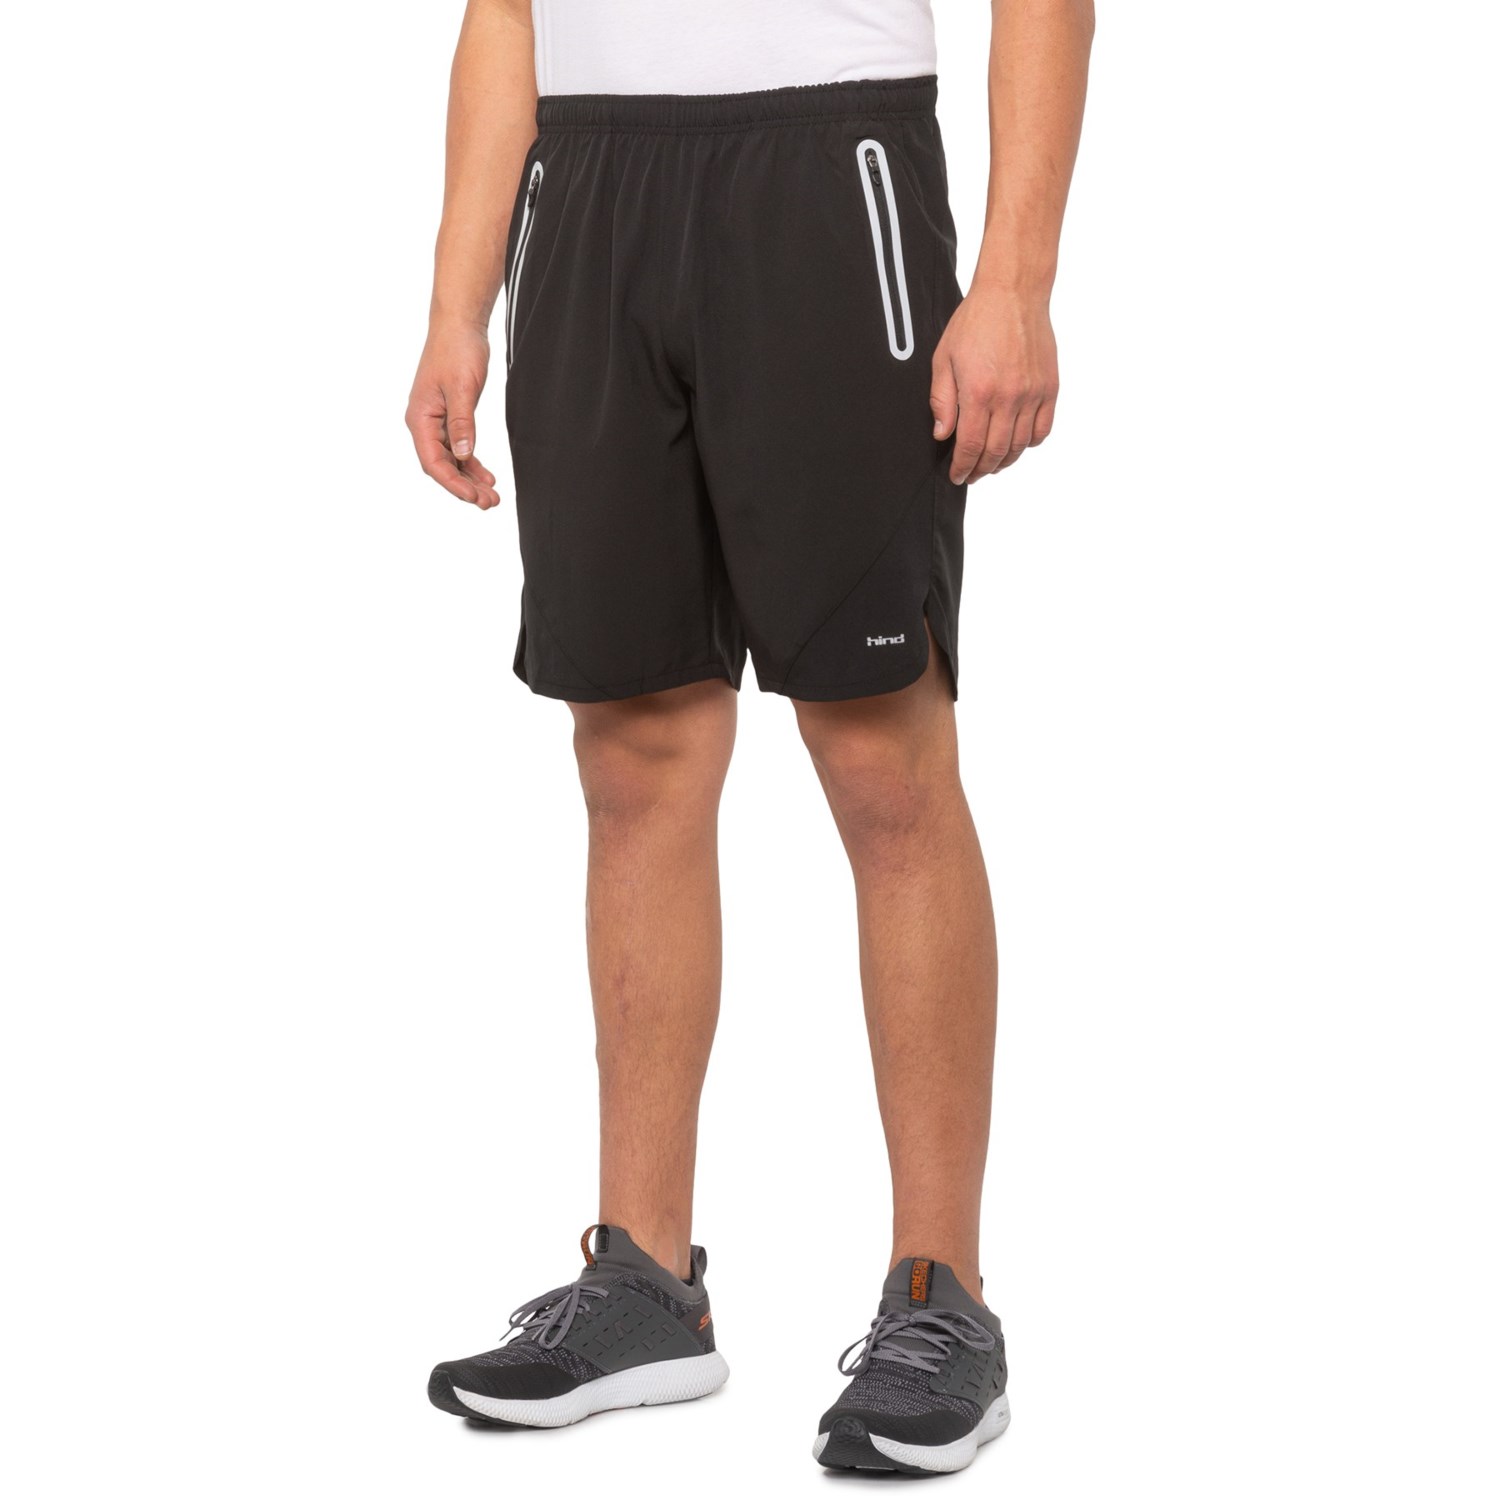 Hind Stretch-Woven Shorts (For Men) - Save 27%